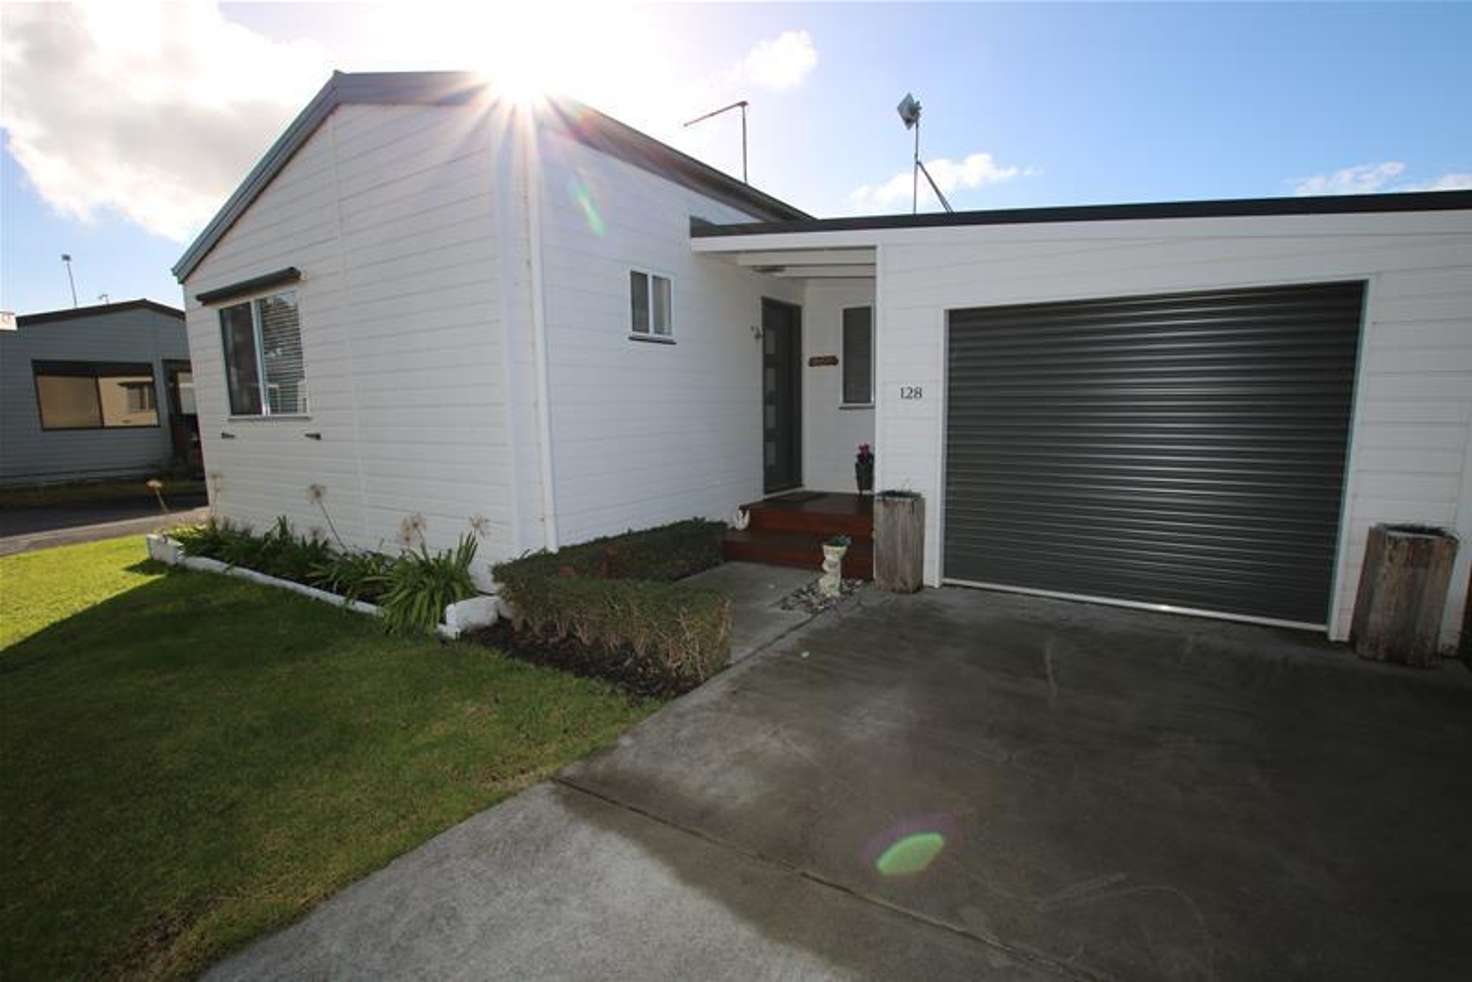 Main view of Homely house listing, 128 Hopkins River Holiday Park, Warrnambool VIC 3280